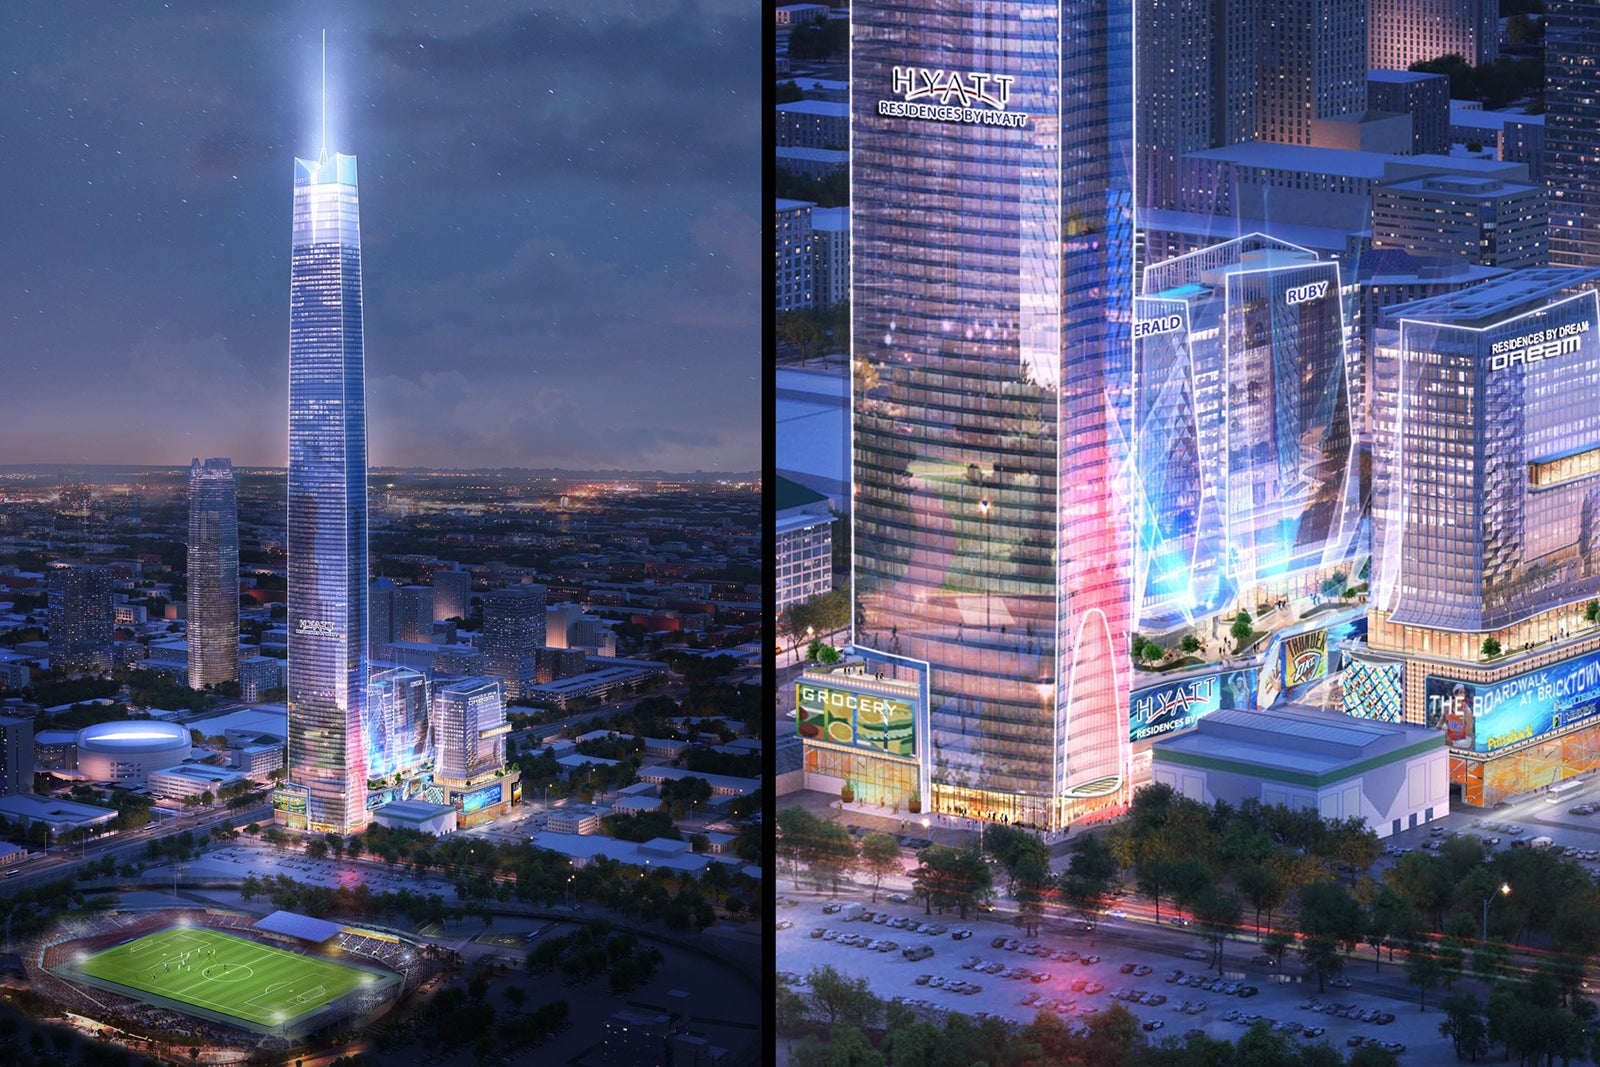 Hyatt hotels proposed for what would be the tallest US tower … in Oklahoma City